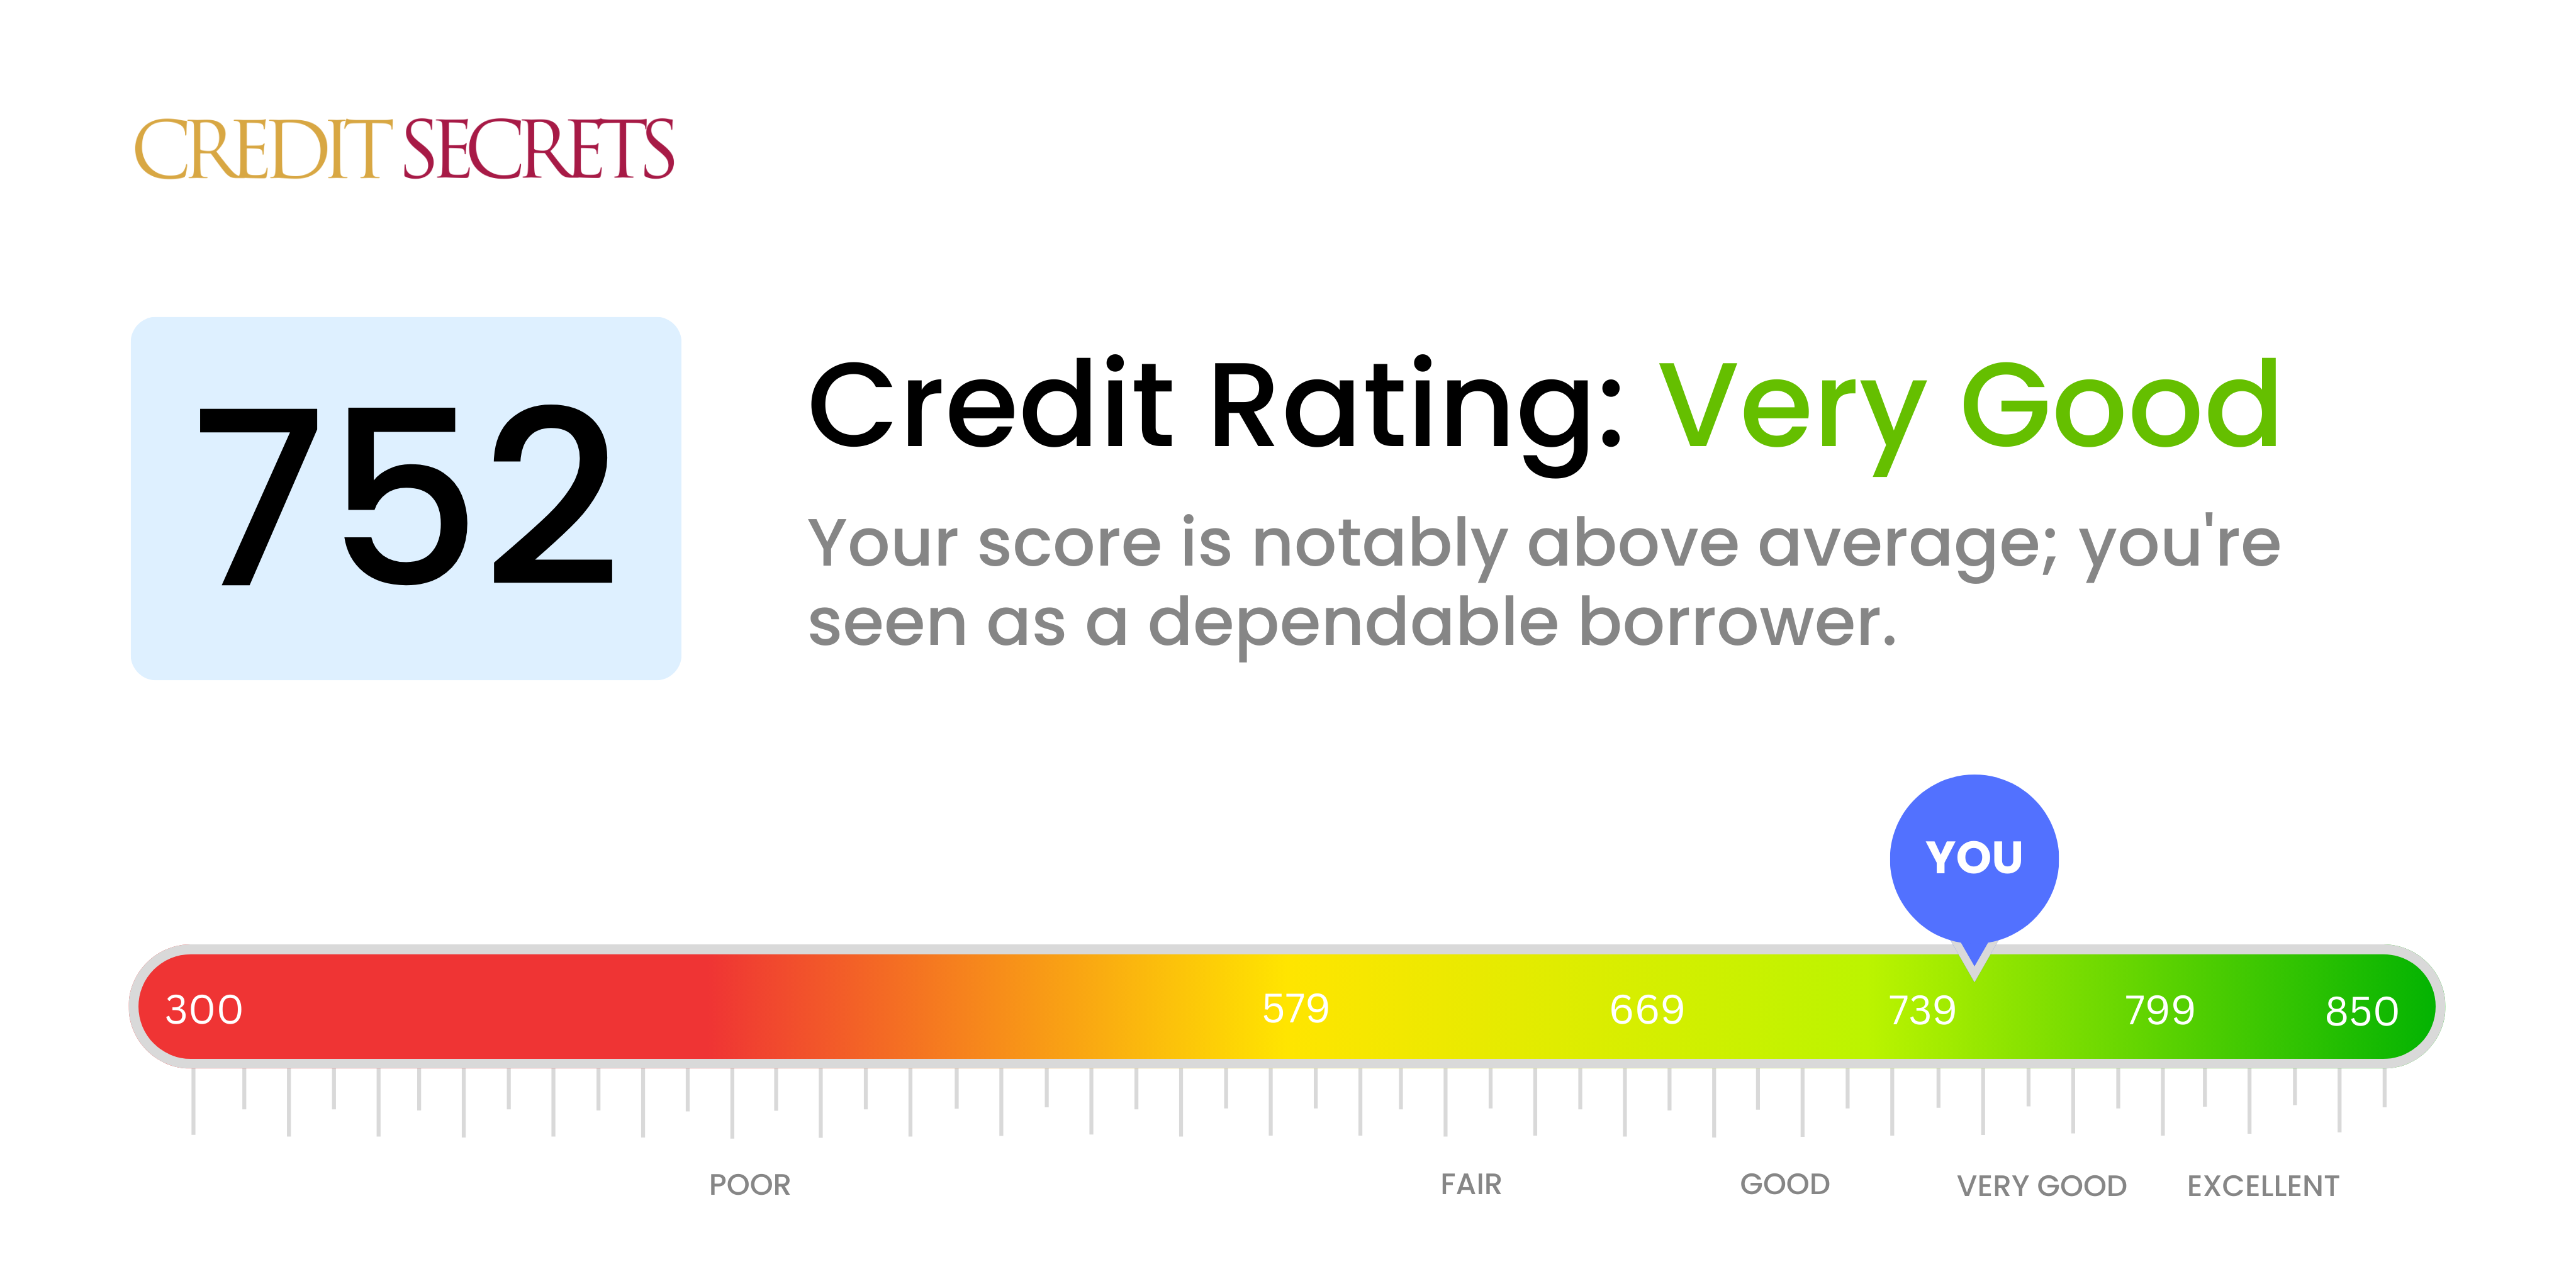 Is 752 a good credit score?